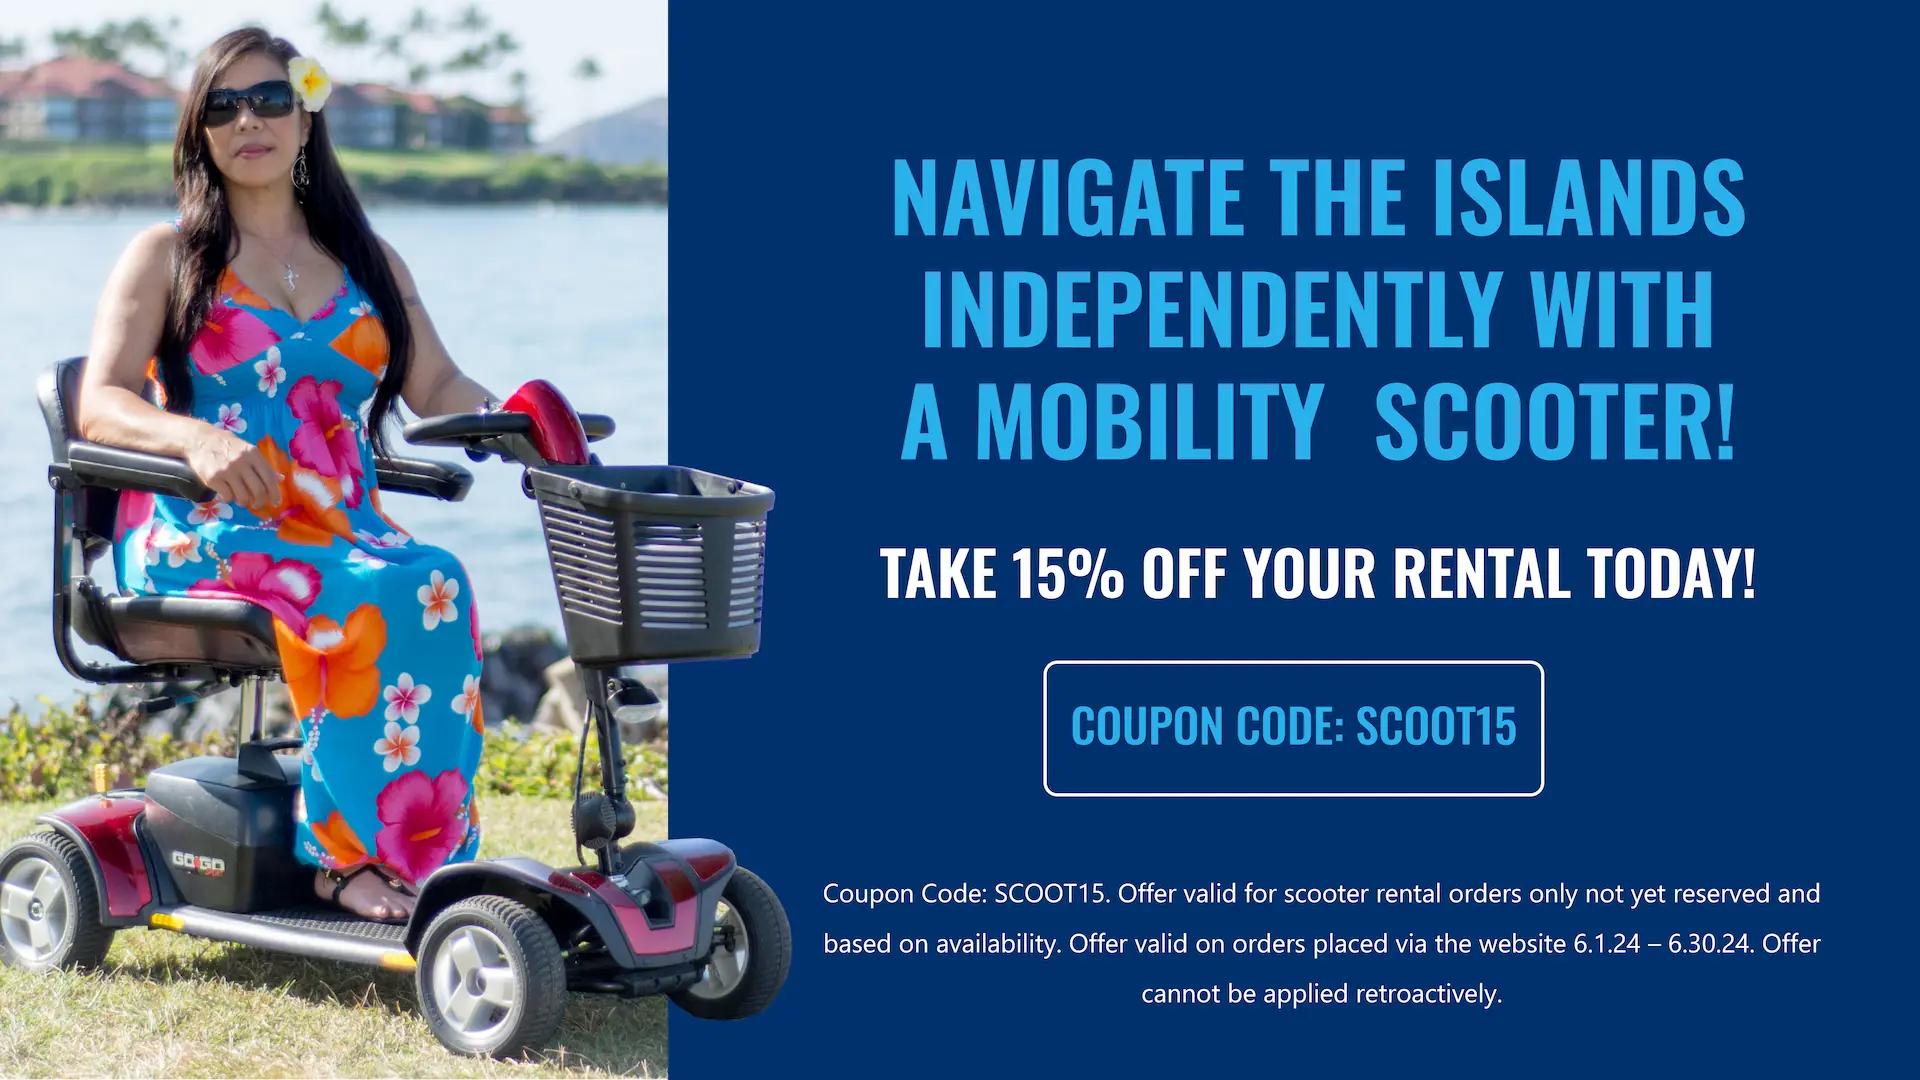 Take 15% off your Mobility Scooter Rentals with code SCOOT15 at checkout